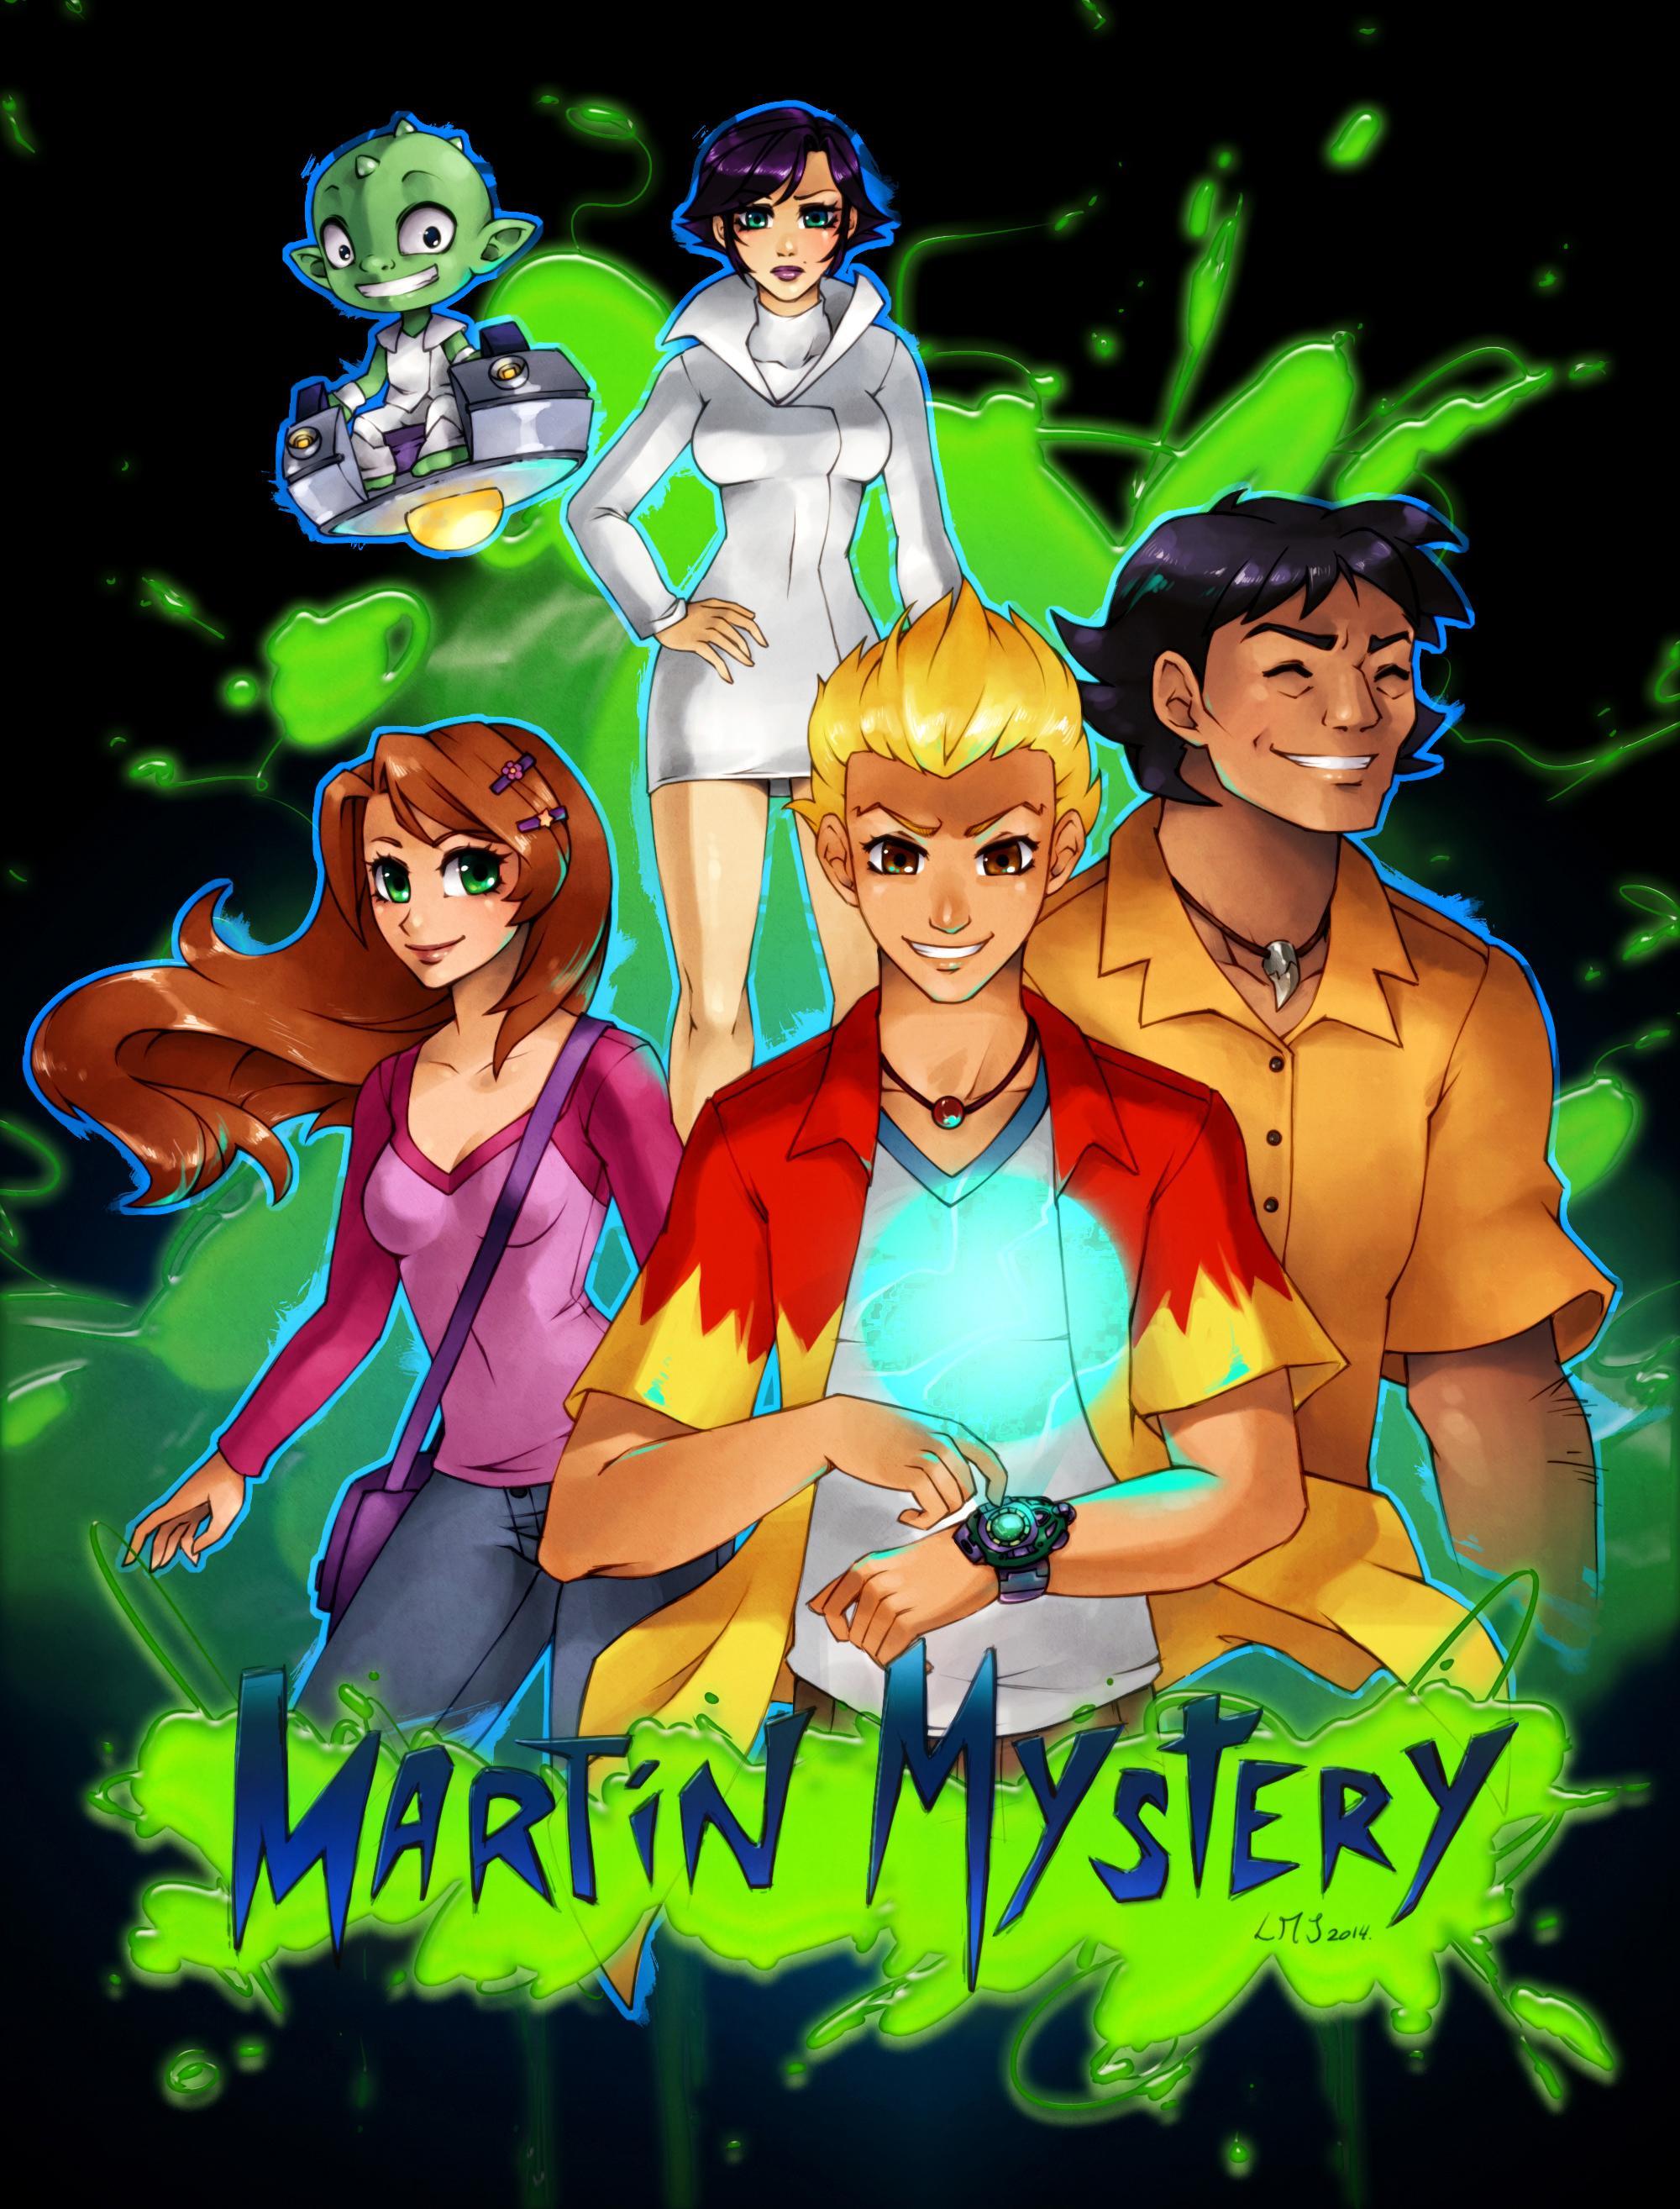 Totally Spies Underground -> Gallery -> Viewing image -> Martin Mystery